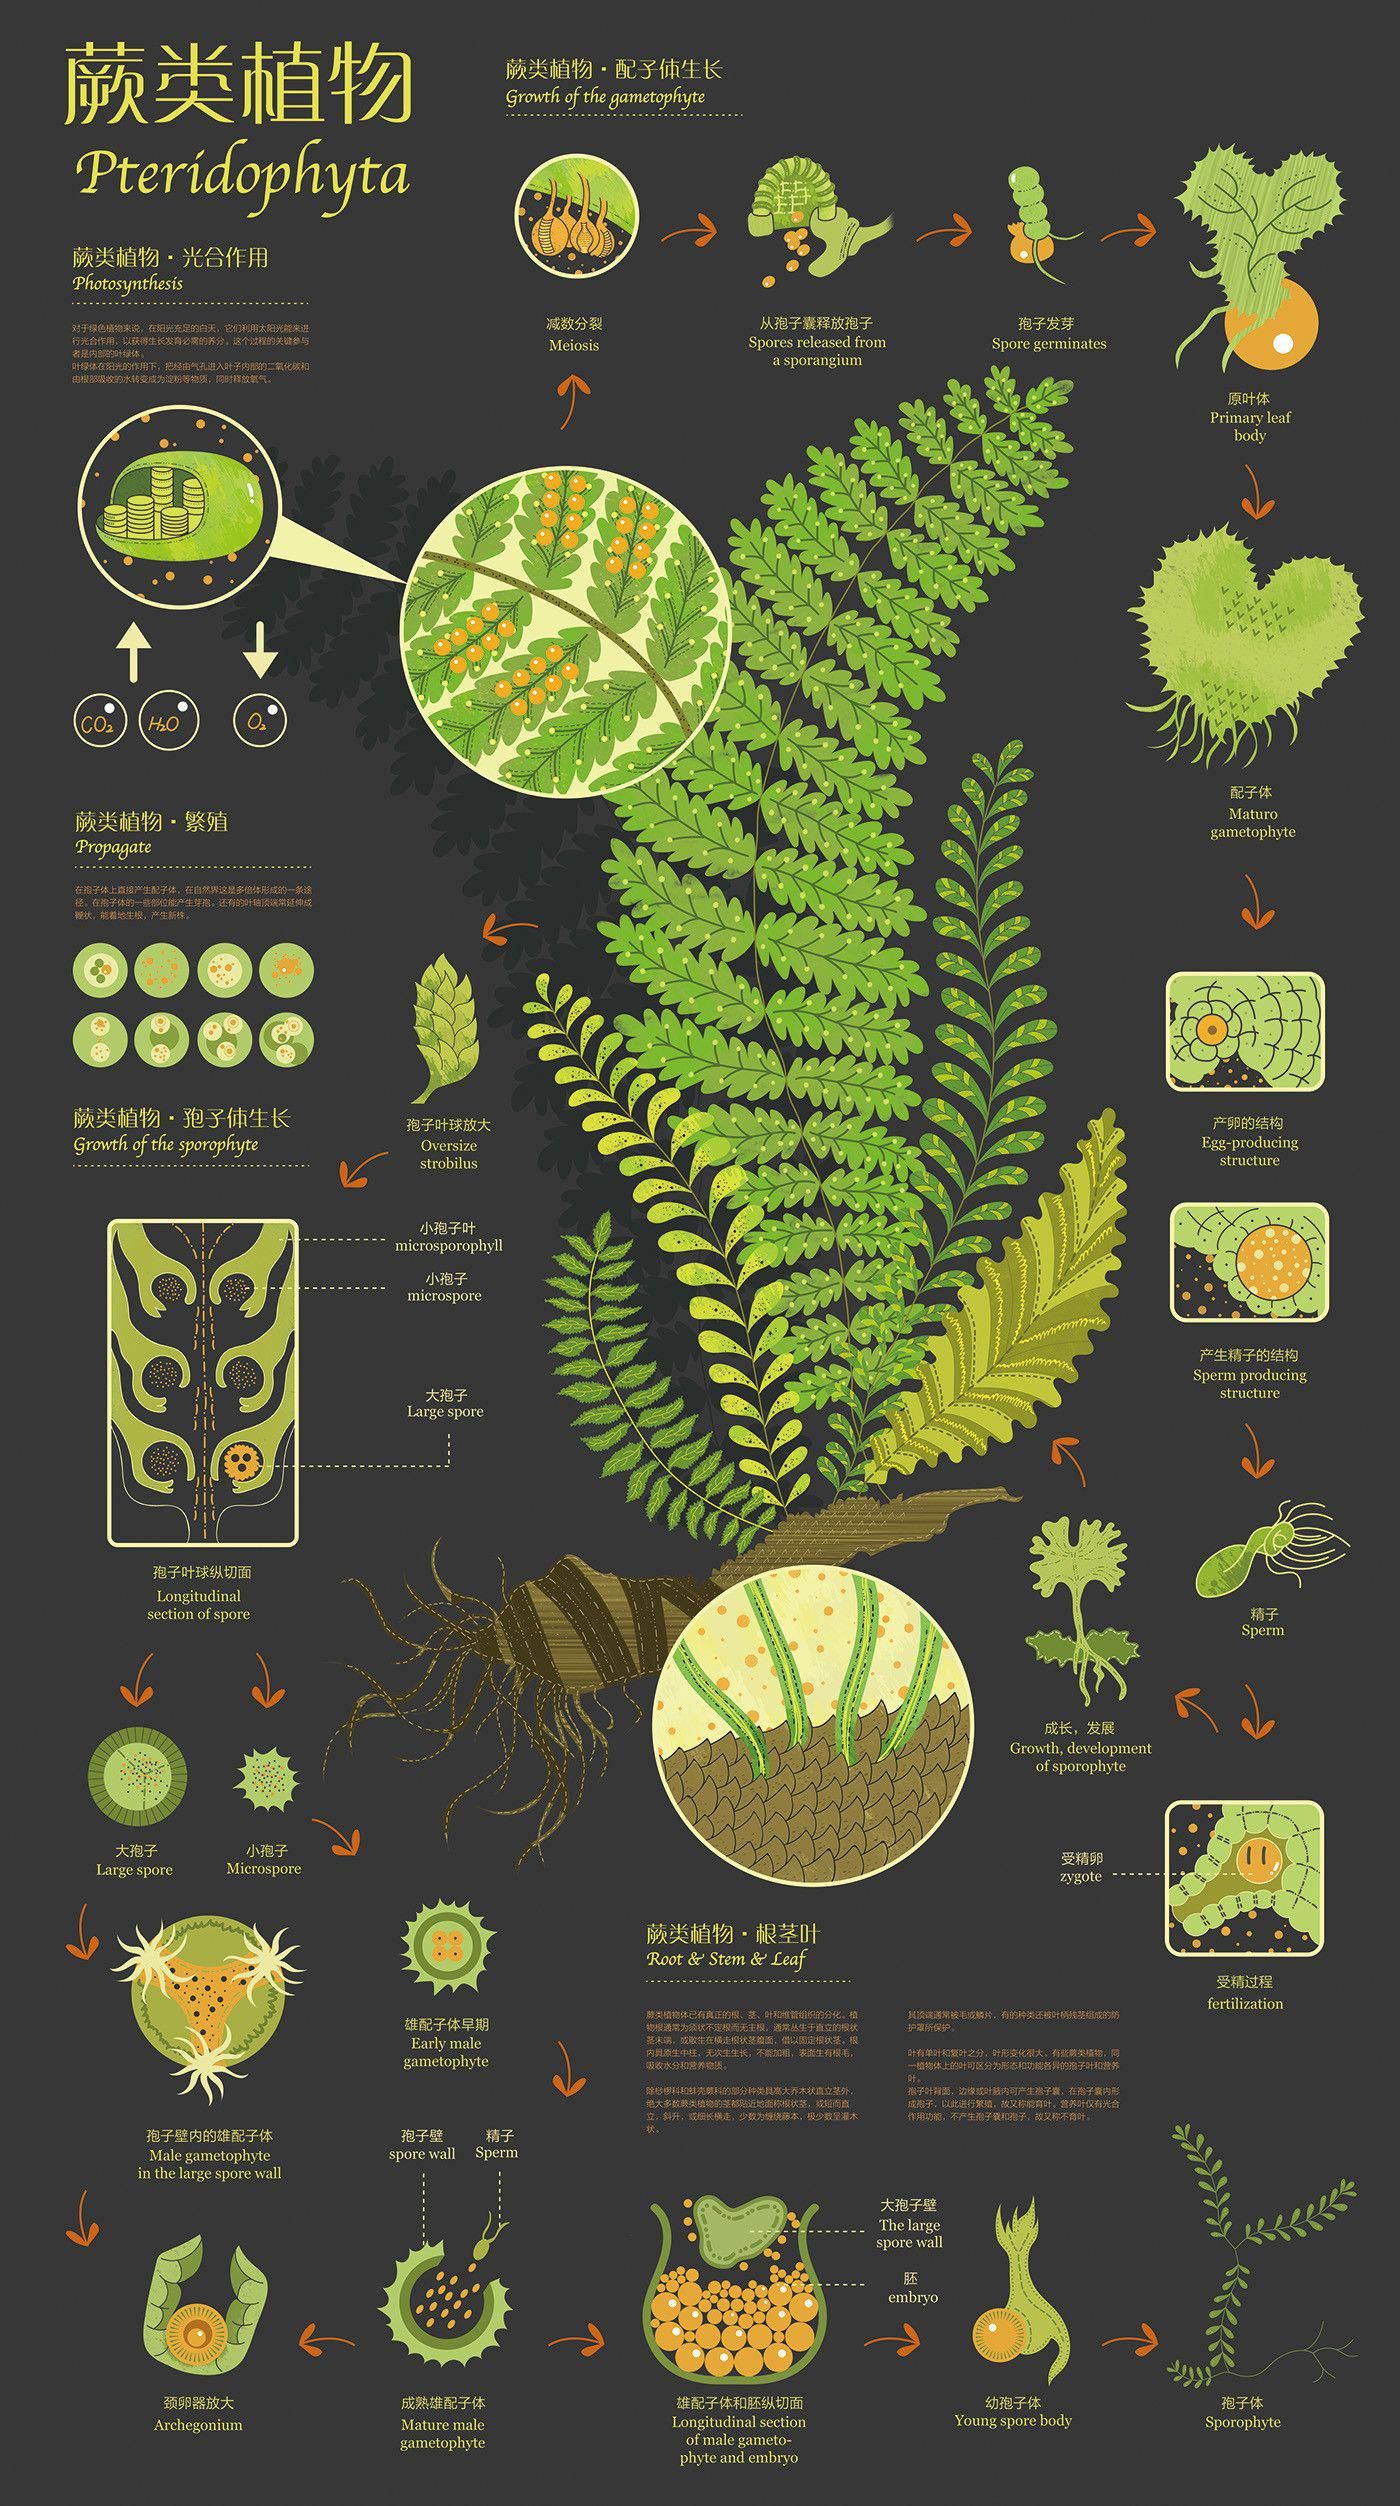 75 Beautiful, Creative, and Brilliant Infographic Design Examples